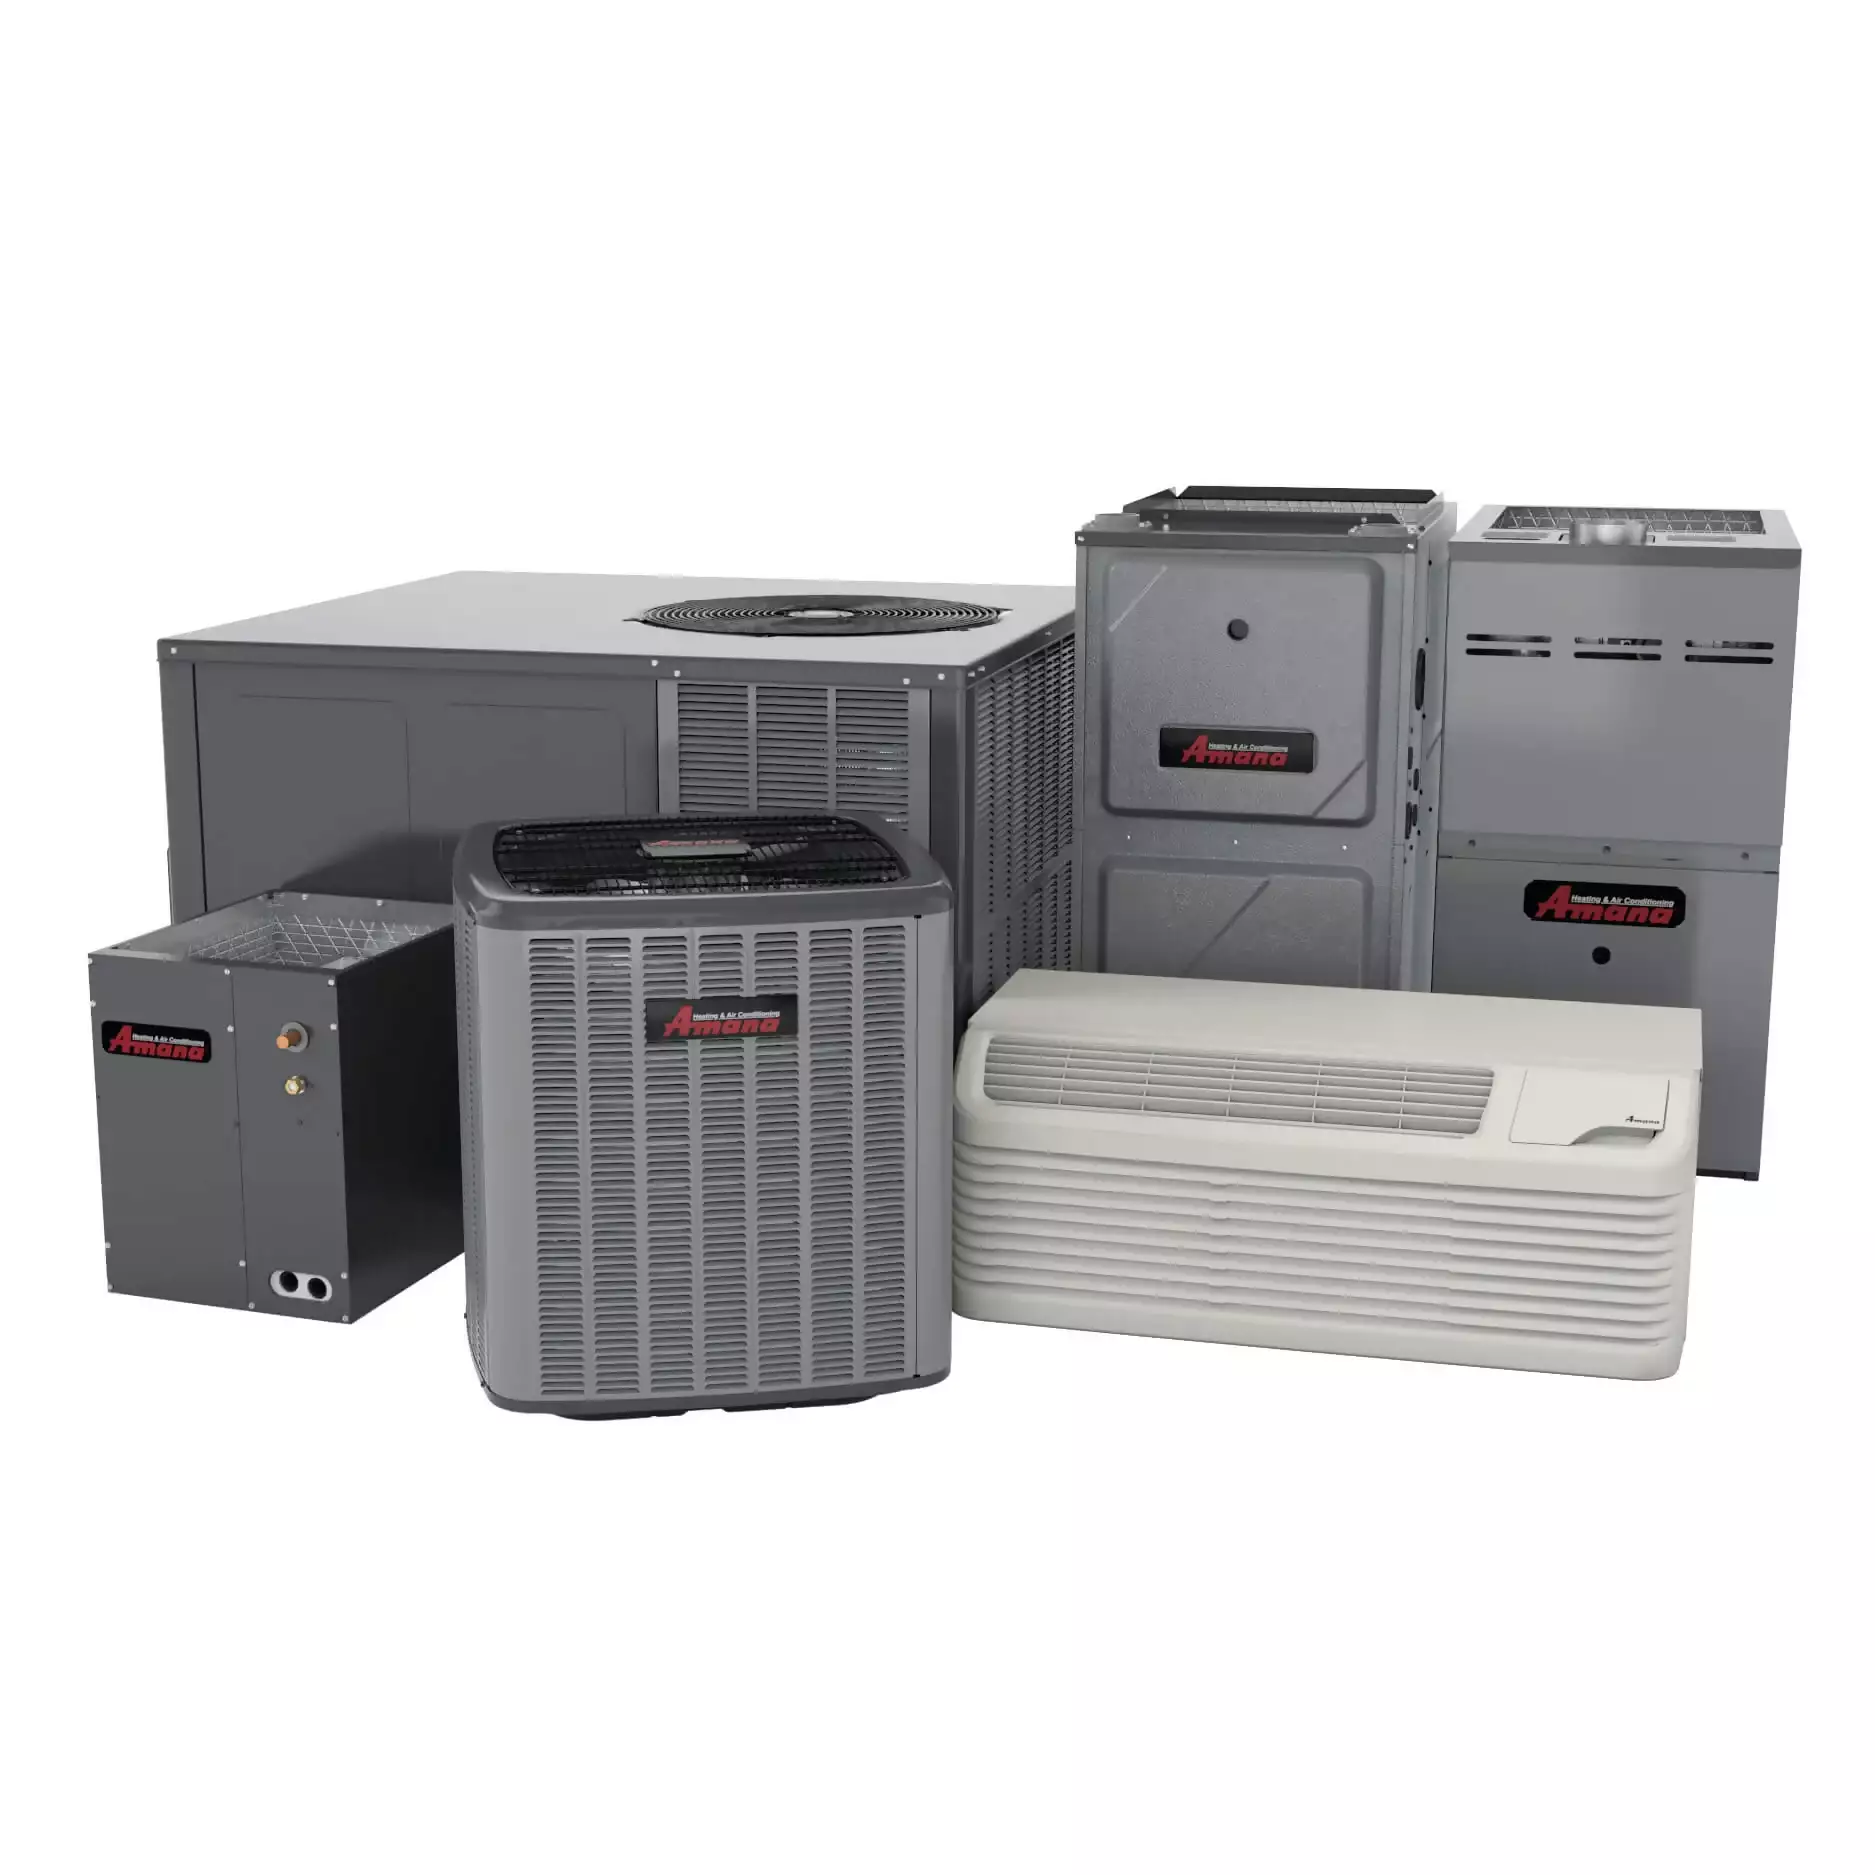 Amana-Heating-and-air-conditioning-products